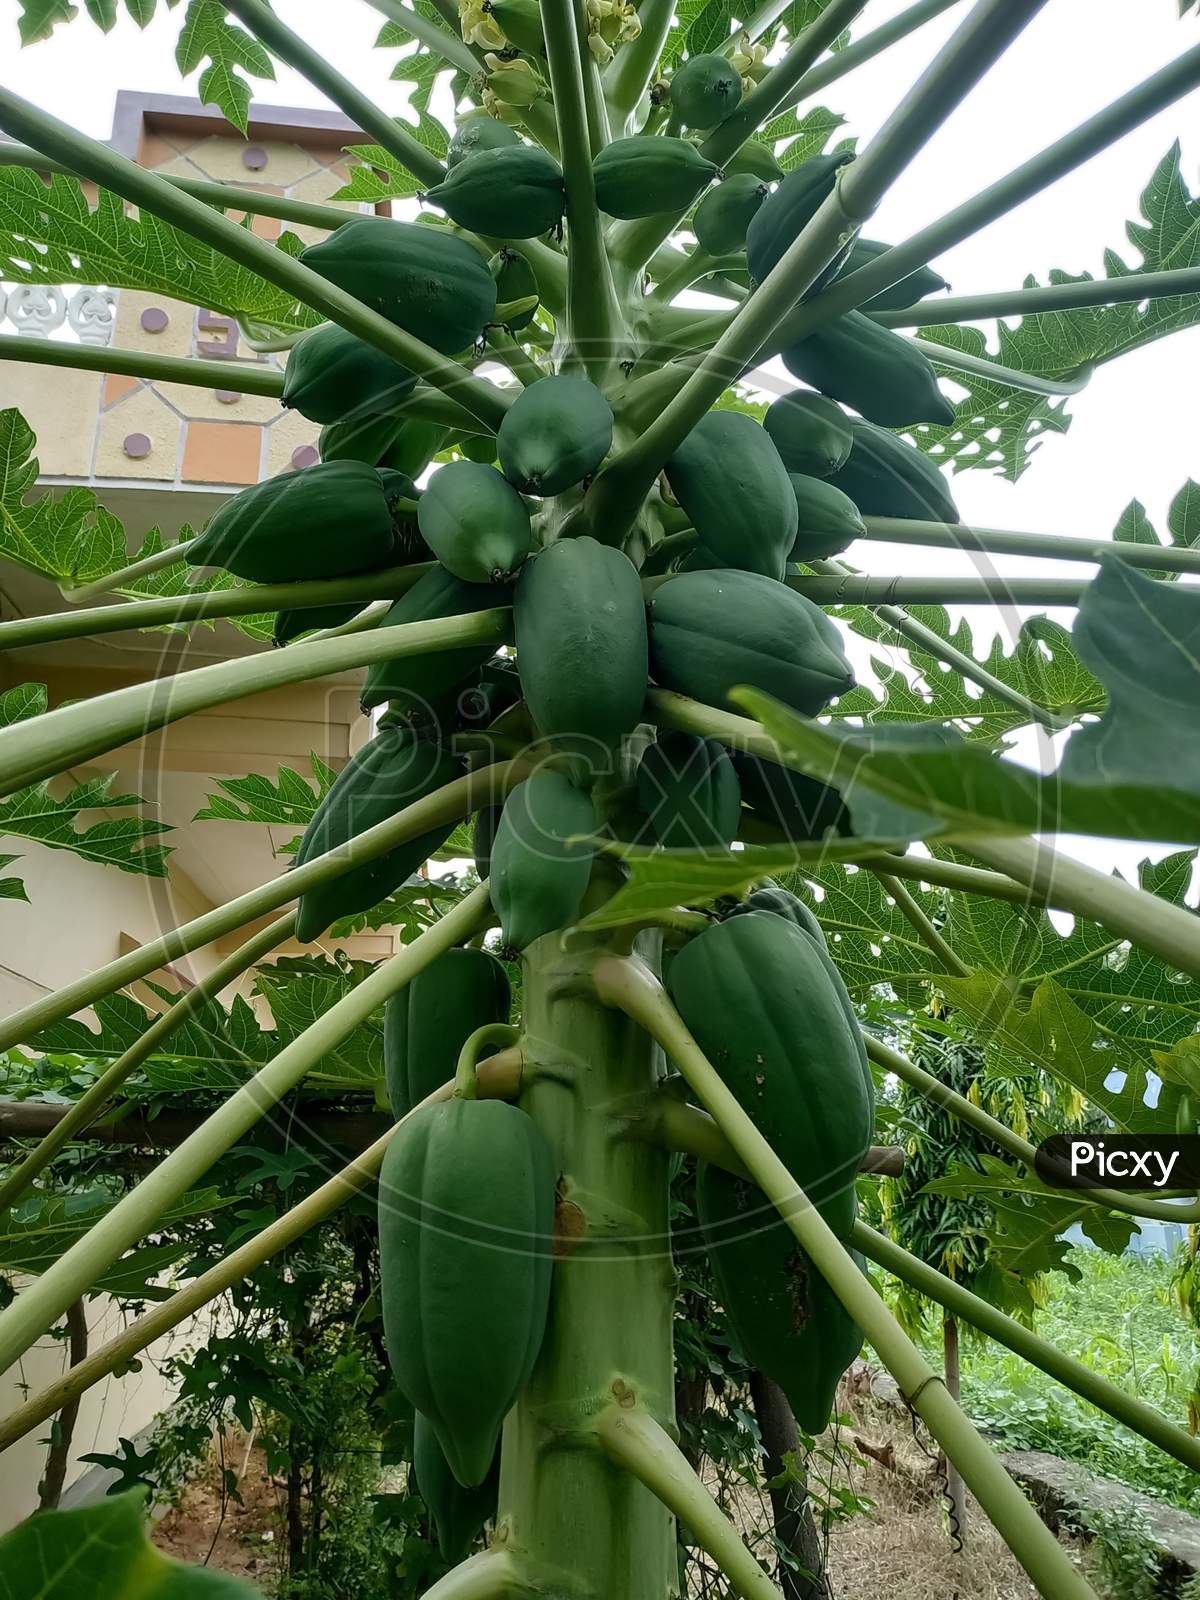 Organic Green Papaya and leafs on The Tree in Garden, Plant or Fruit from India.